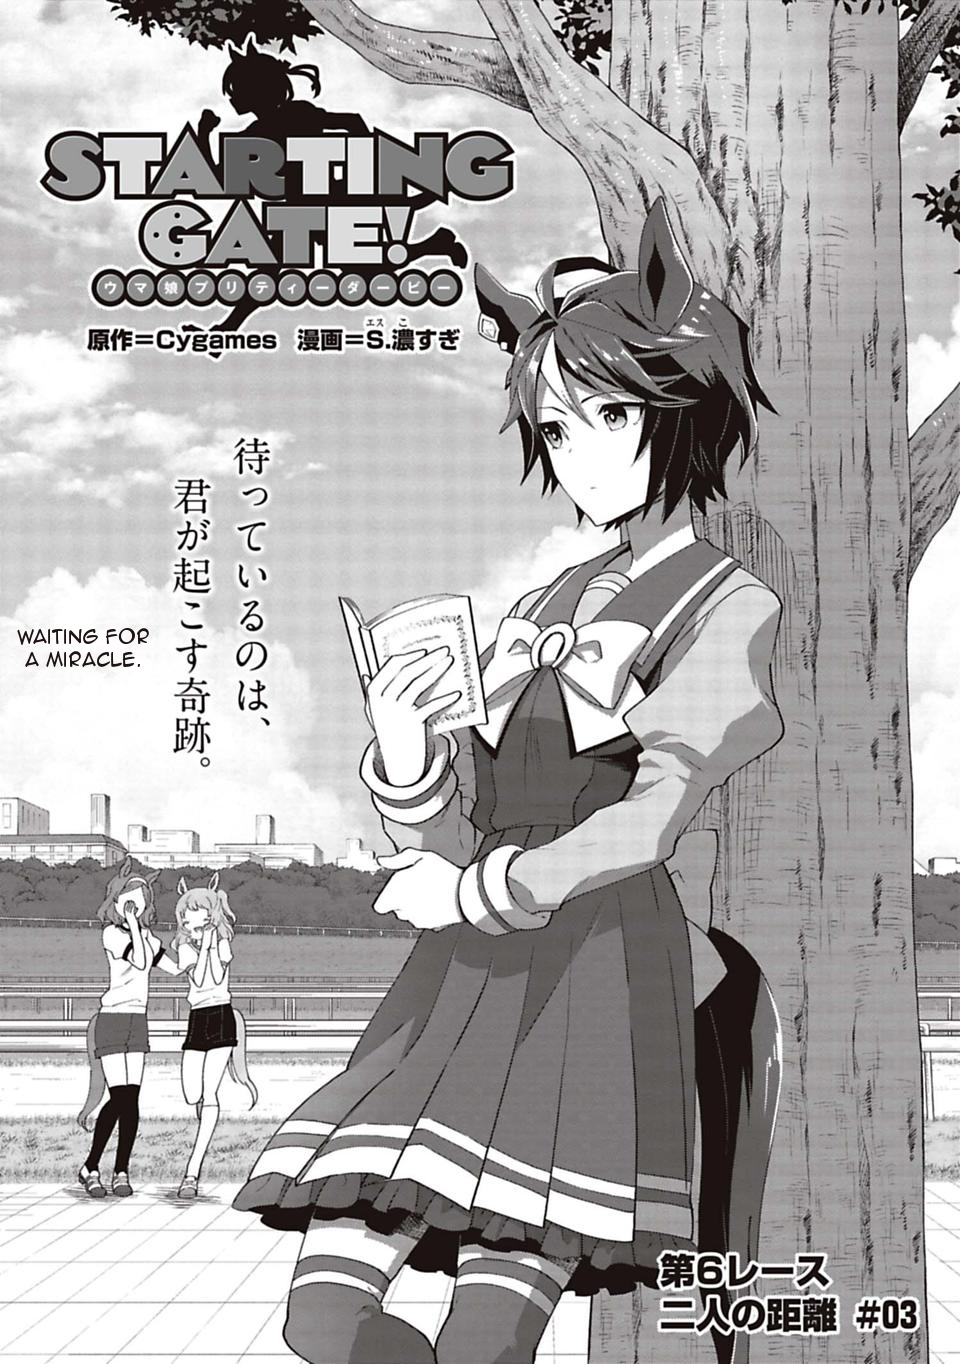 Starting Gate! Uma Musume Pretty Derby Vol.1 Chapter 6: The Distance Between Two People 3 - Picture 1